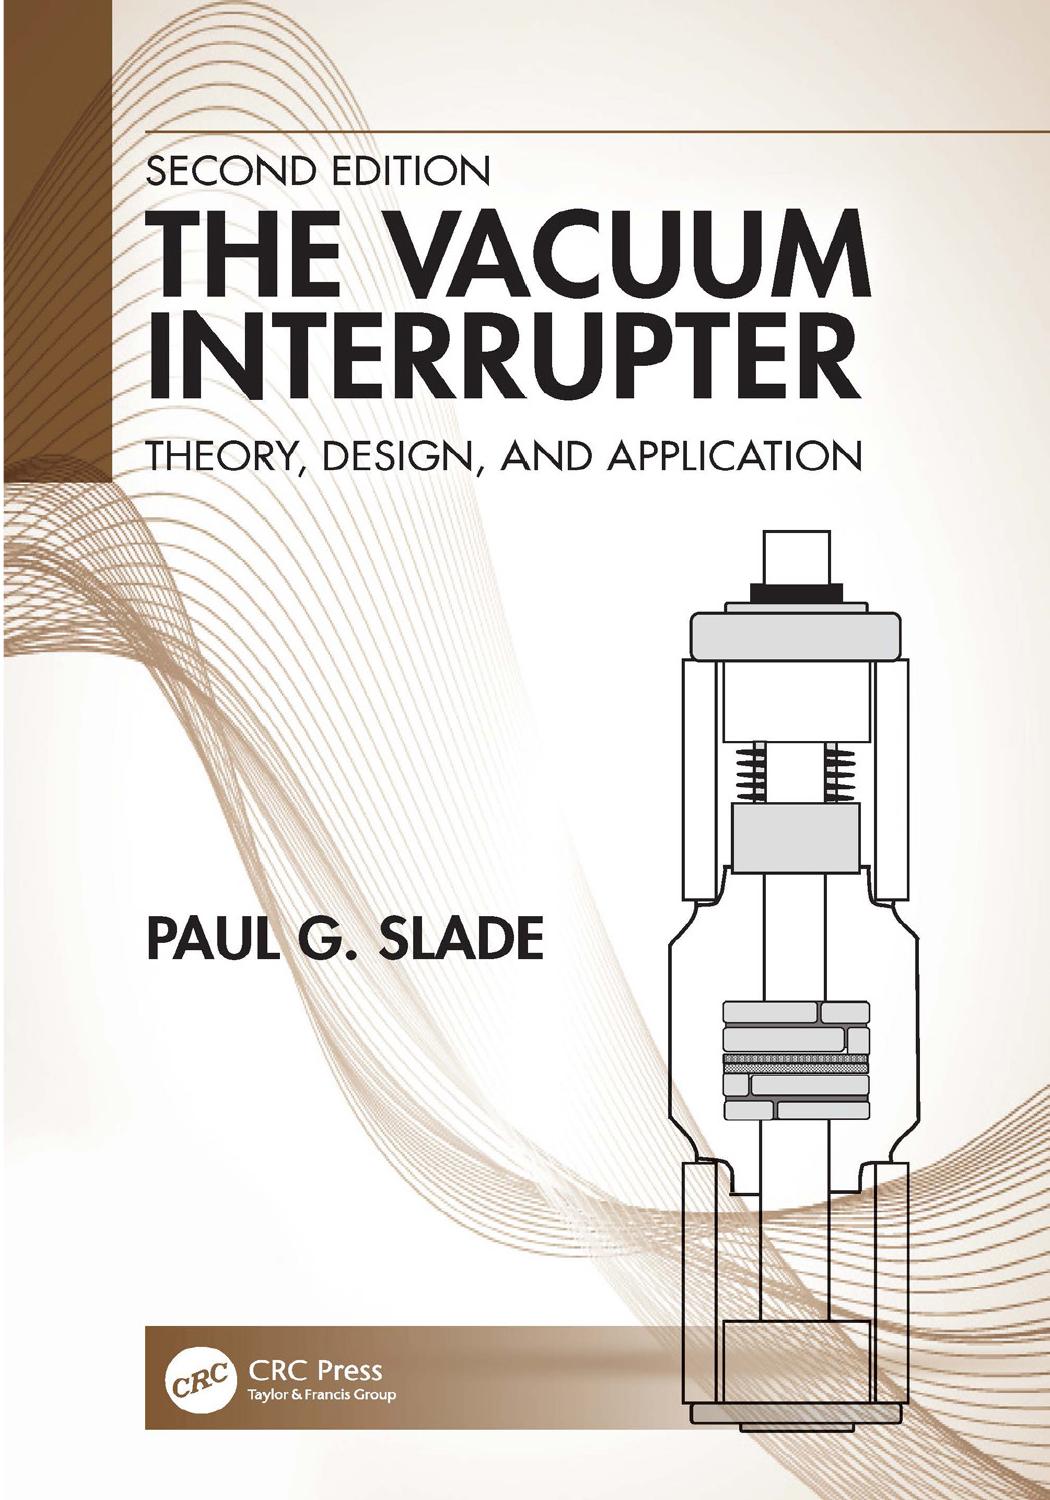 The vacuum interrupter : theory, design, and application